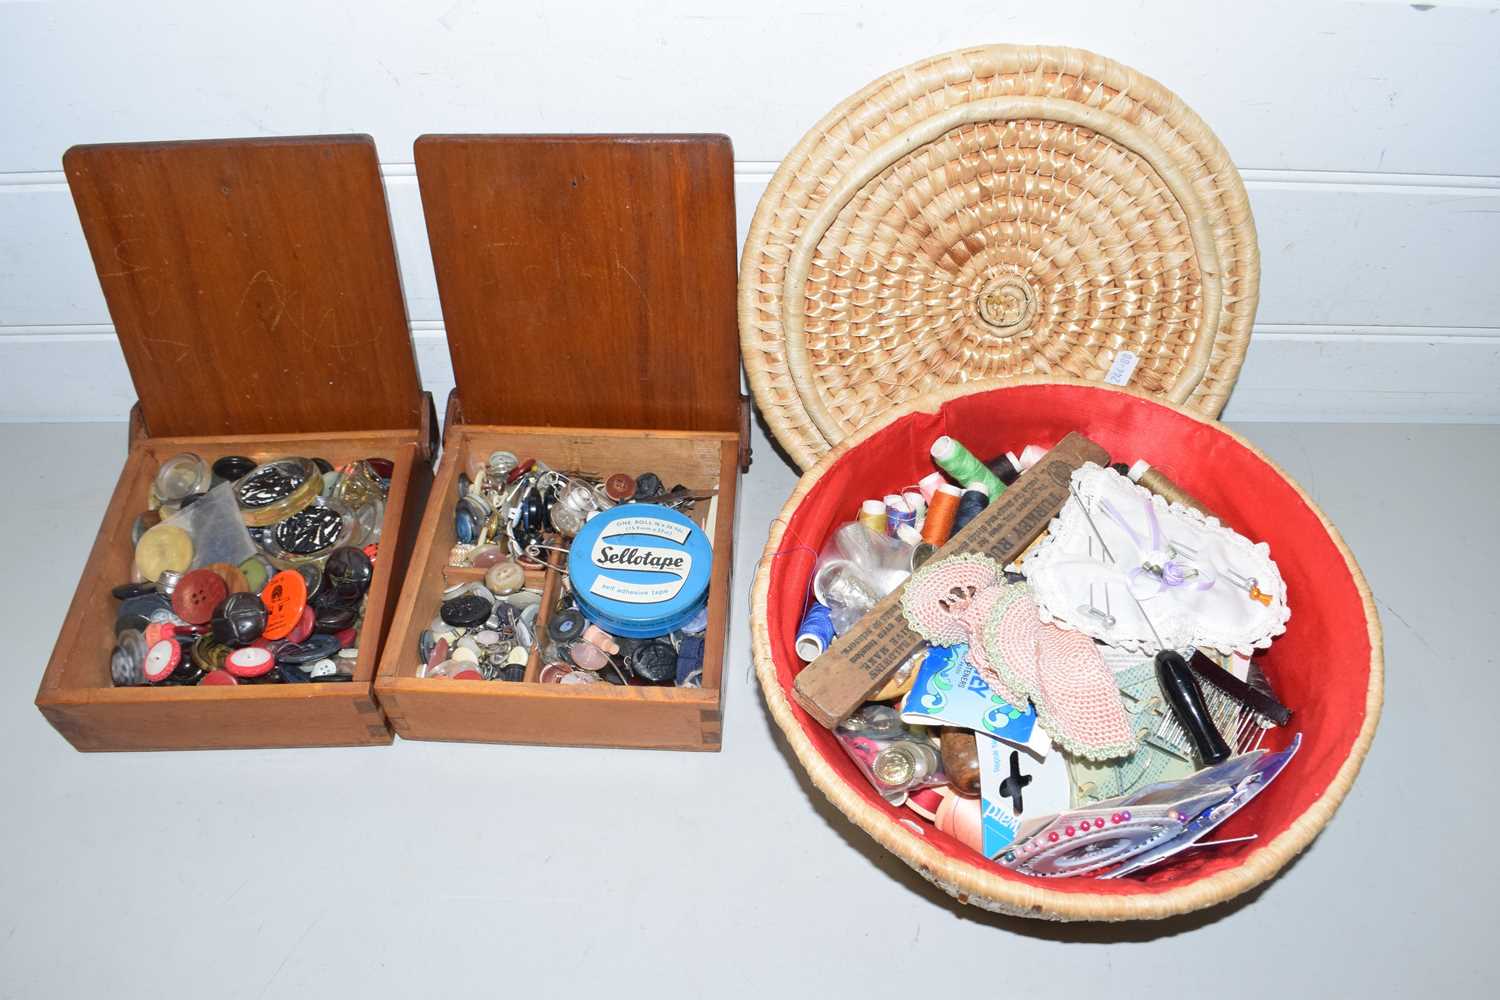 Two wooden boxes and a wicker basket of various buttons and sewing supplies